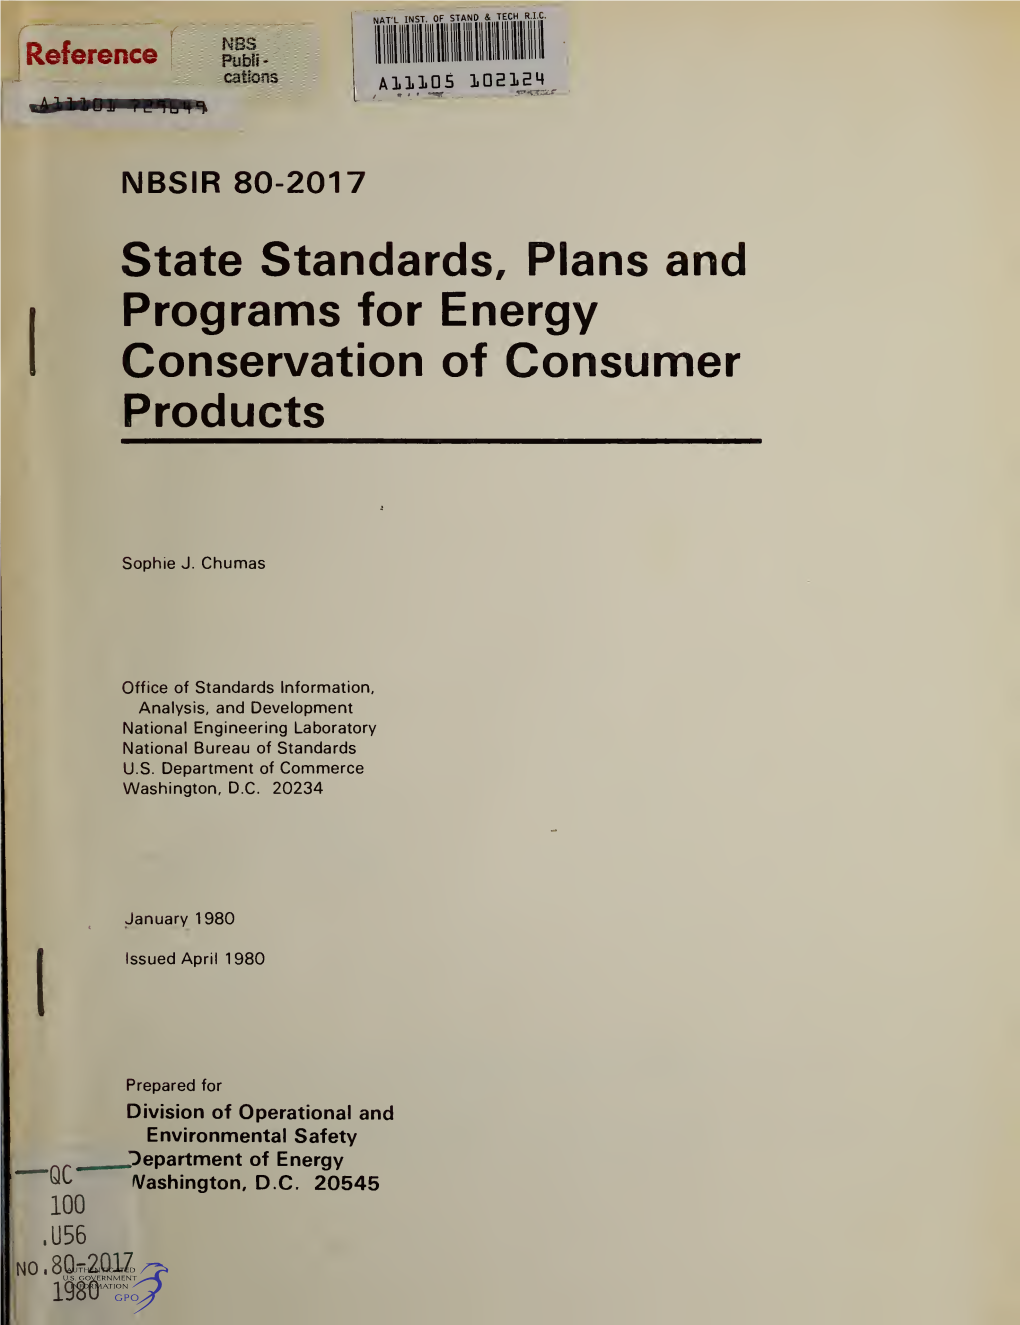 State Standards, Plans and Programs for Energy Conservation of Consumer Products